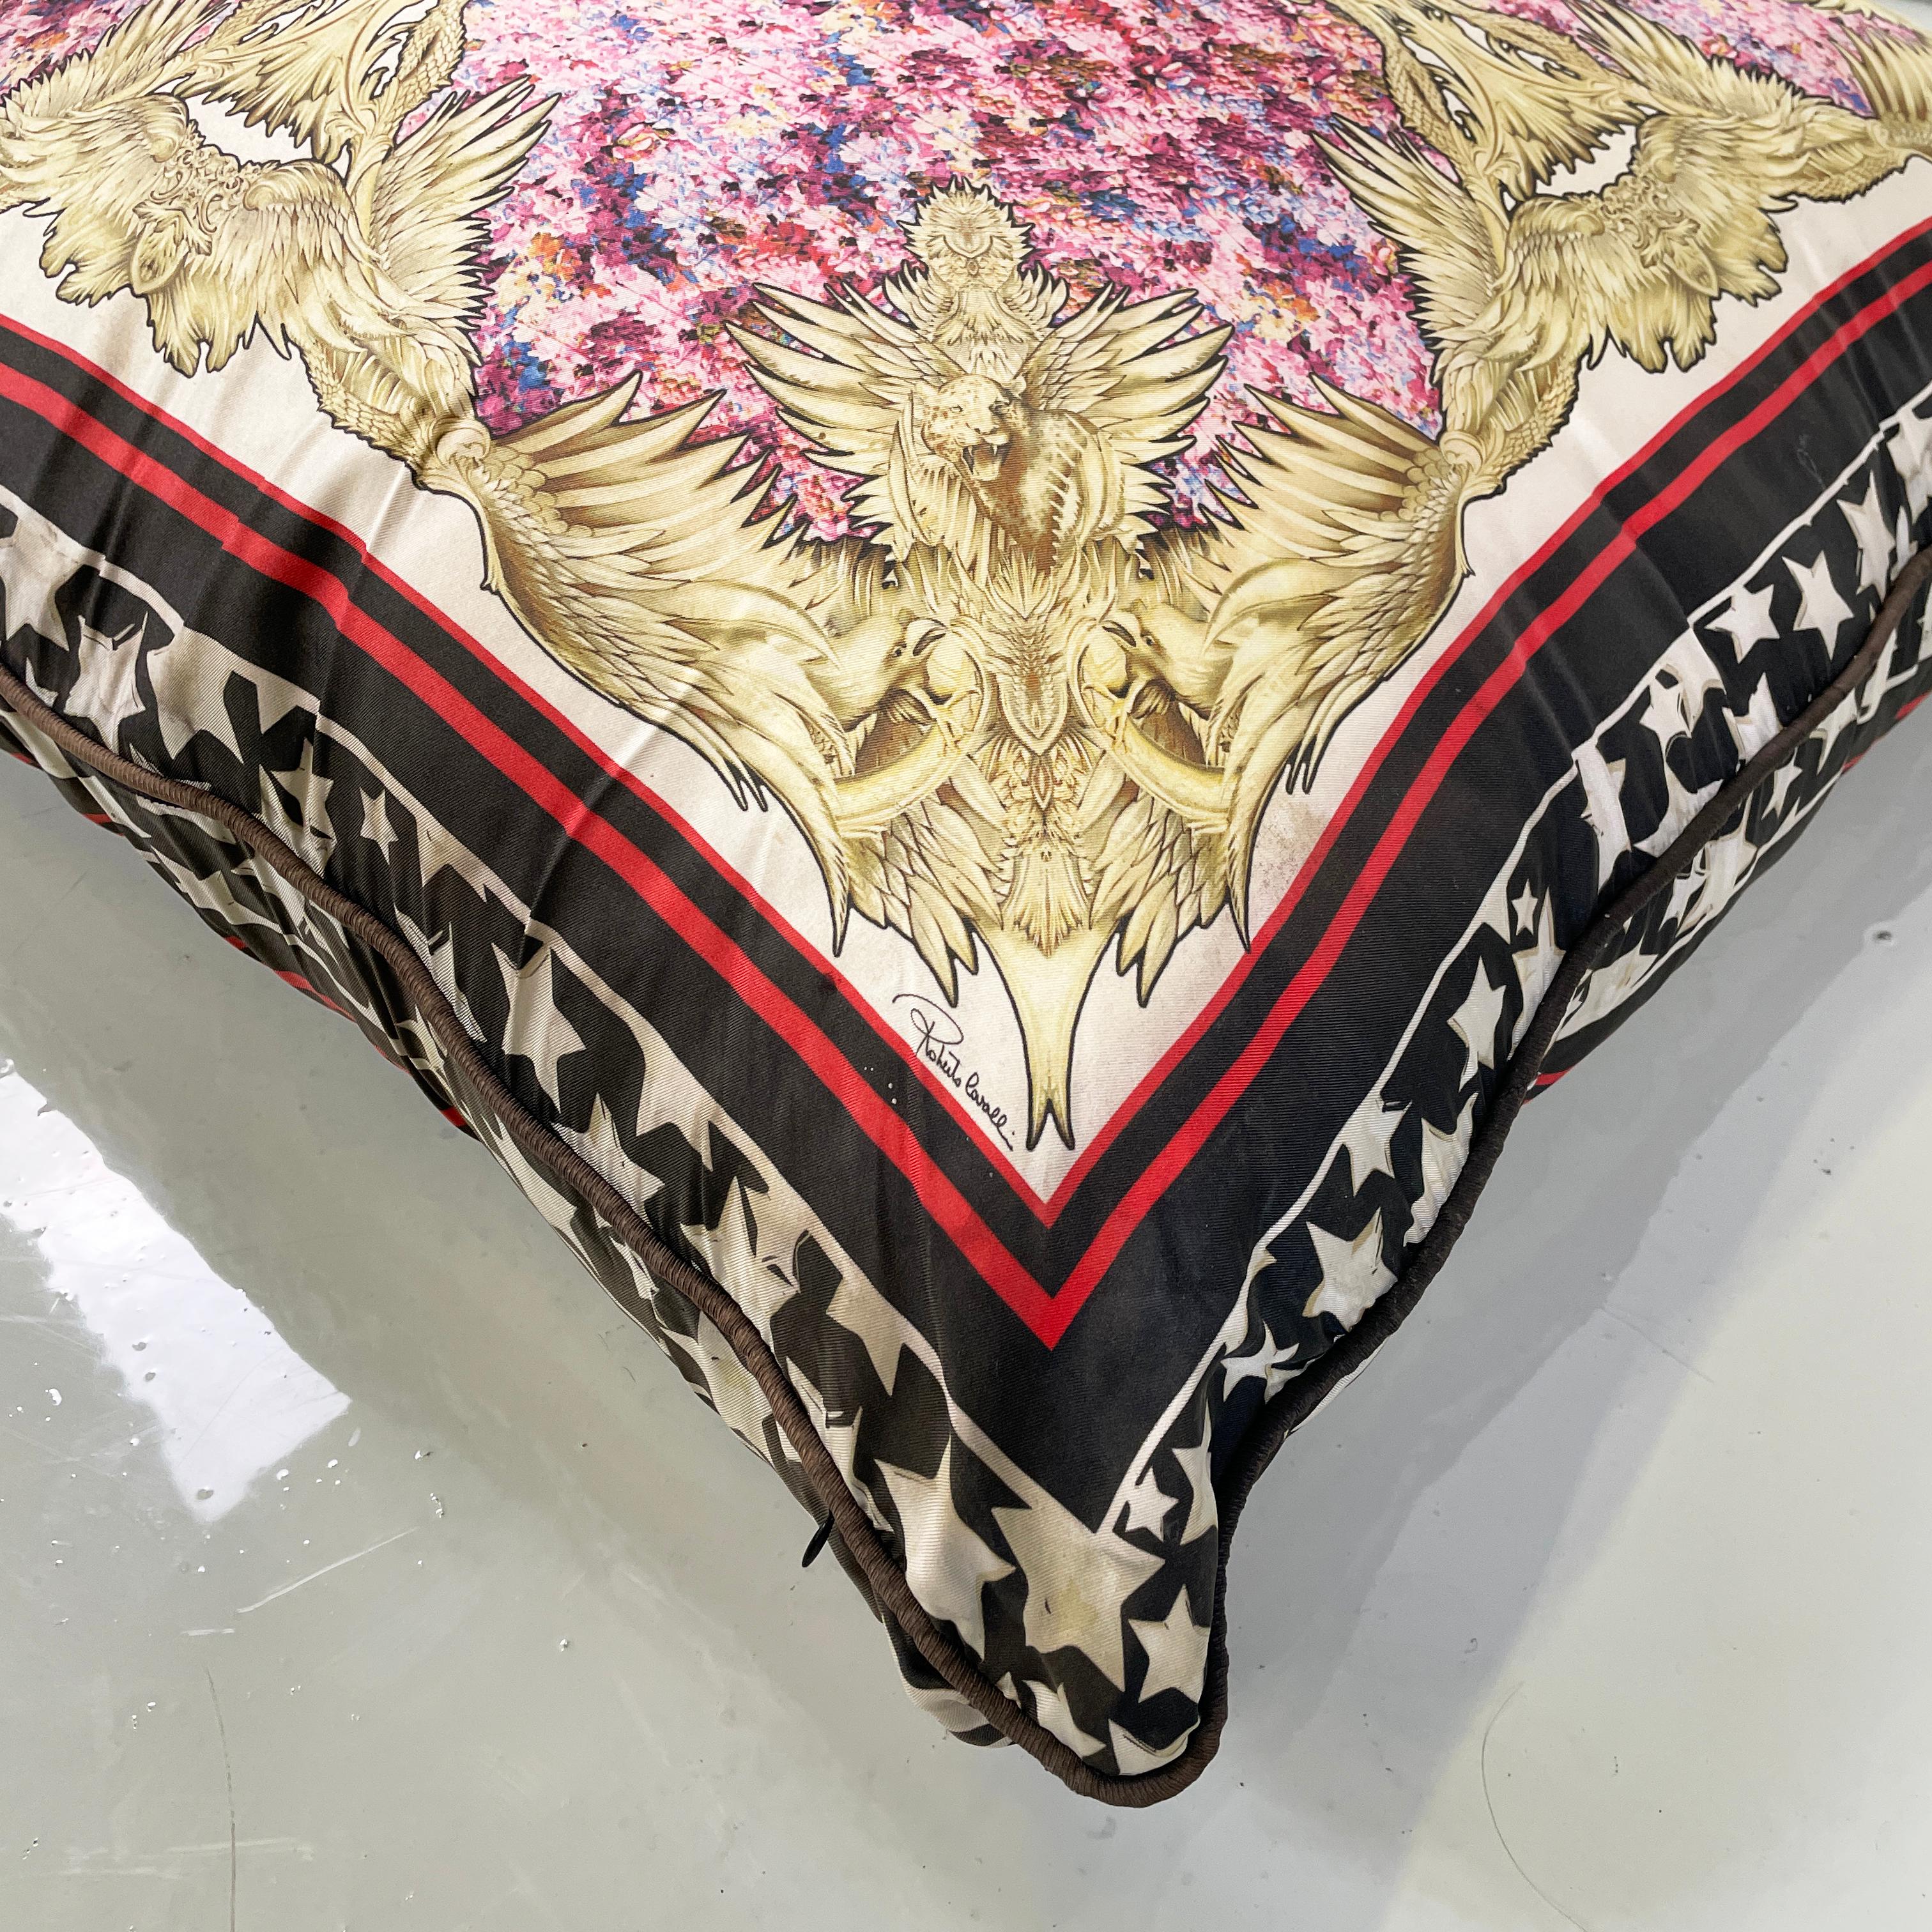 Italian post modern Fabric cushion with colored pattern by Roberto Cavalli 2000s In Fair Condition For Sale In MIlano, IT